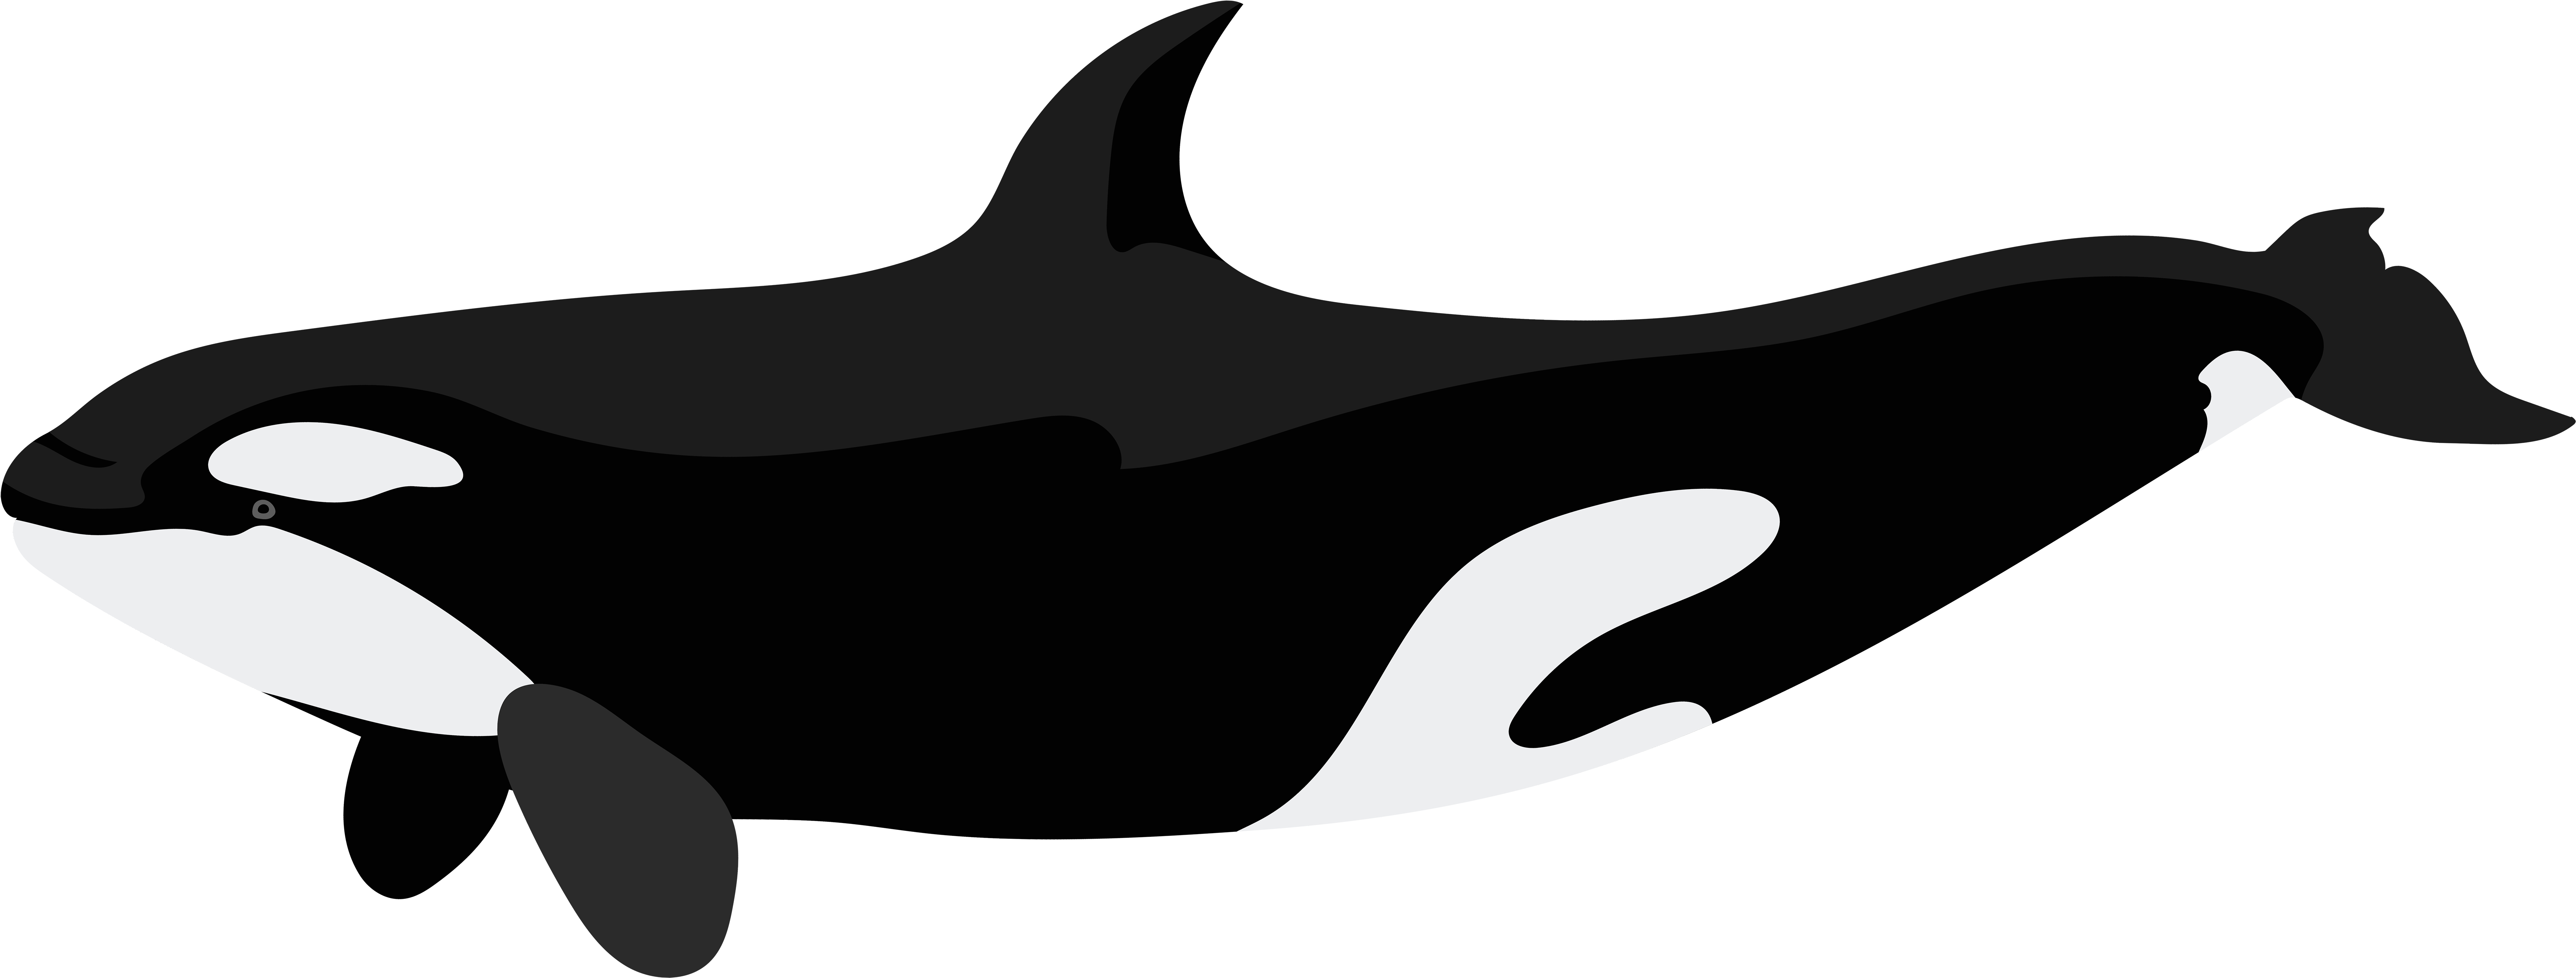 Desktop Screen Of Killer Whale Png Transparent Images - Black And White Orca Whale Clipart (8000x3071)